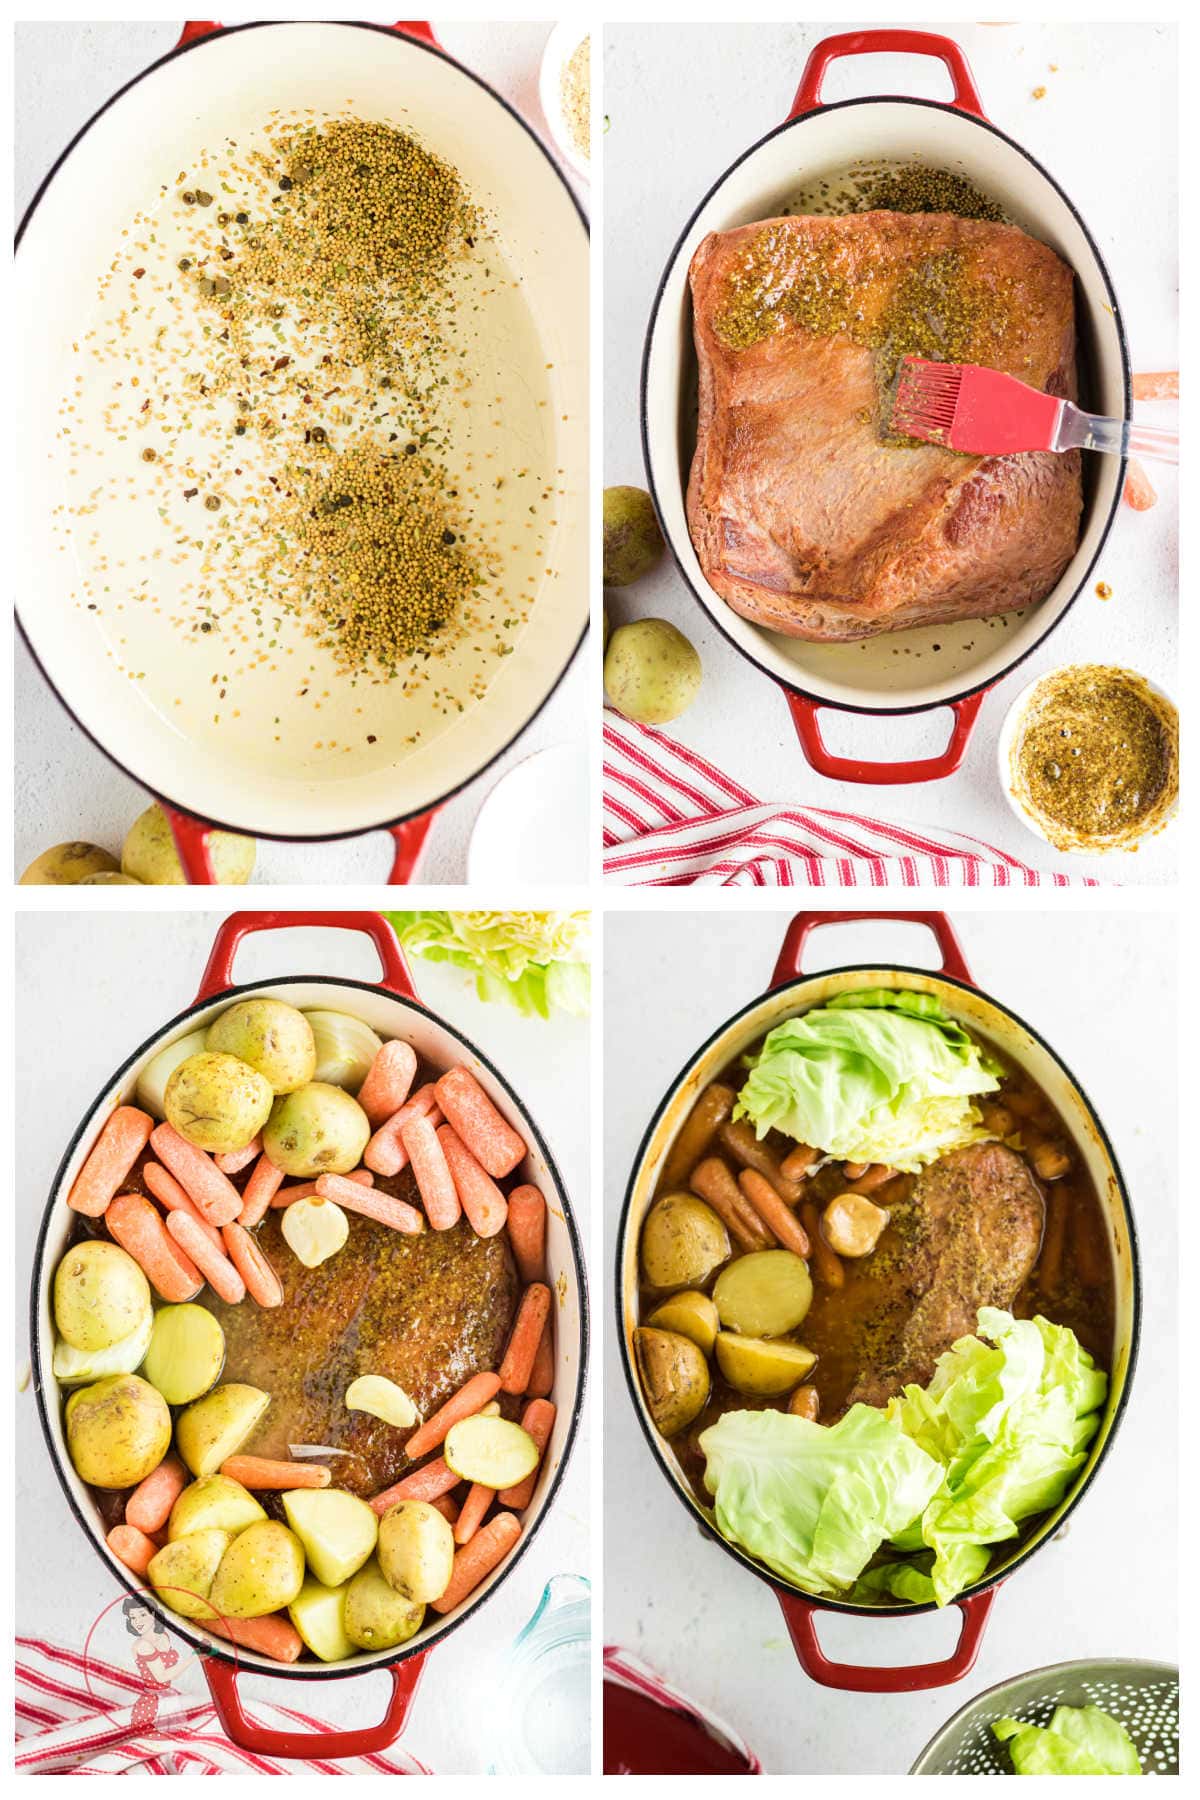 Step by step images showing how to make corned beef and cabbage in the oven.